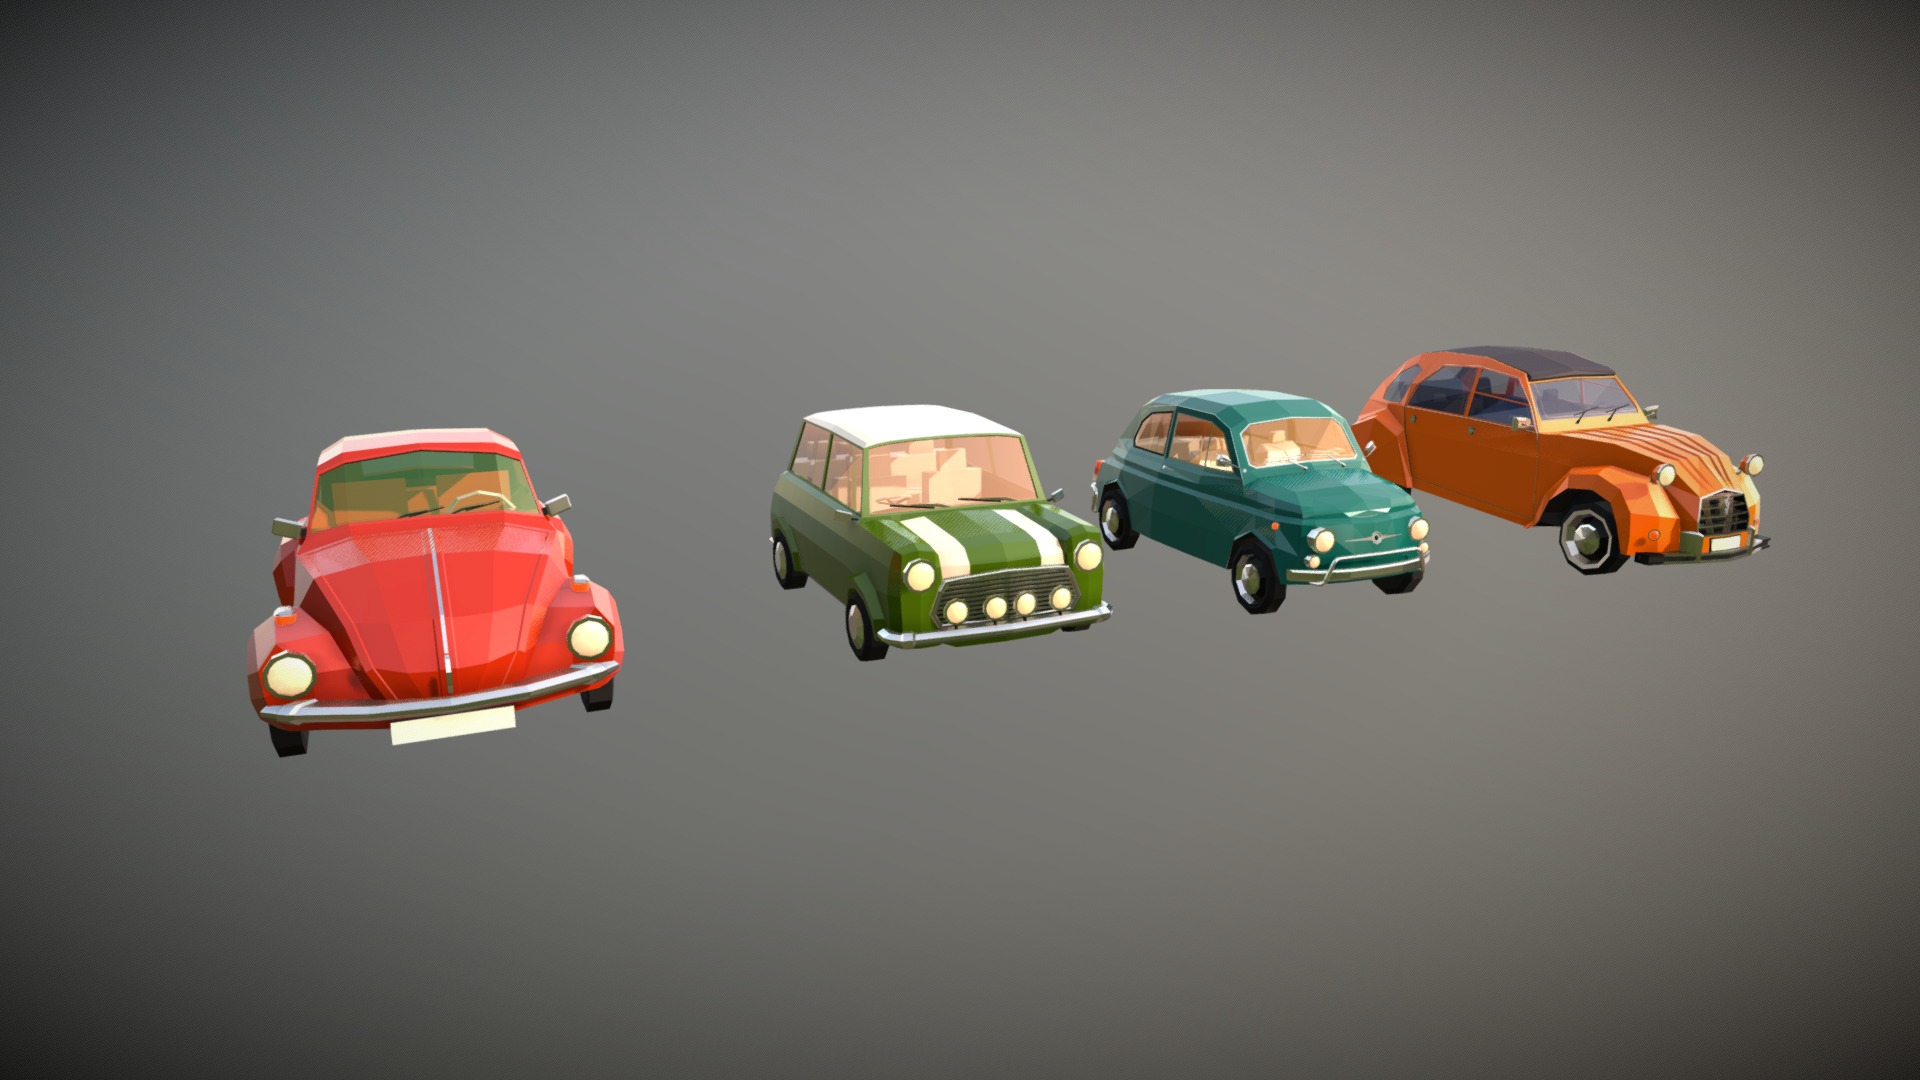 3D model Low Poly City Car Pack - This is a 3D model of the Low Poly City Car Pack. The 3D model is about a group of toy cars.